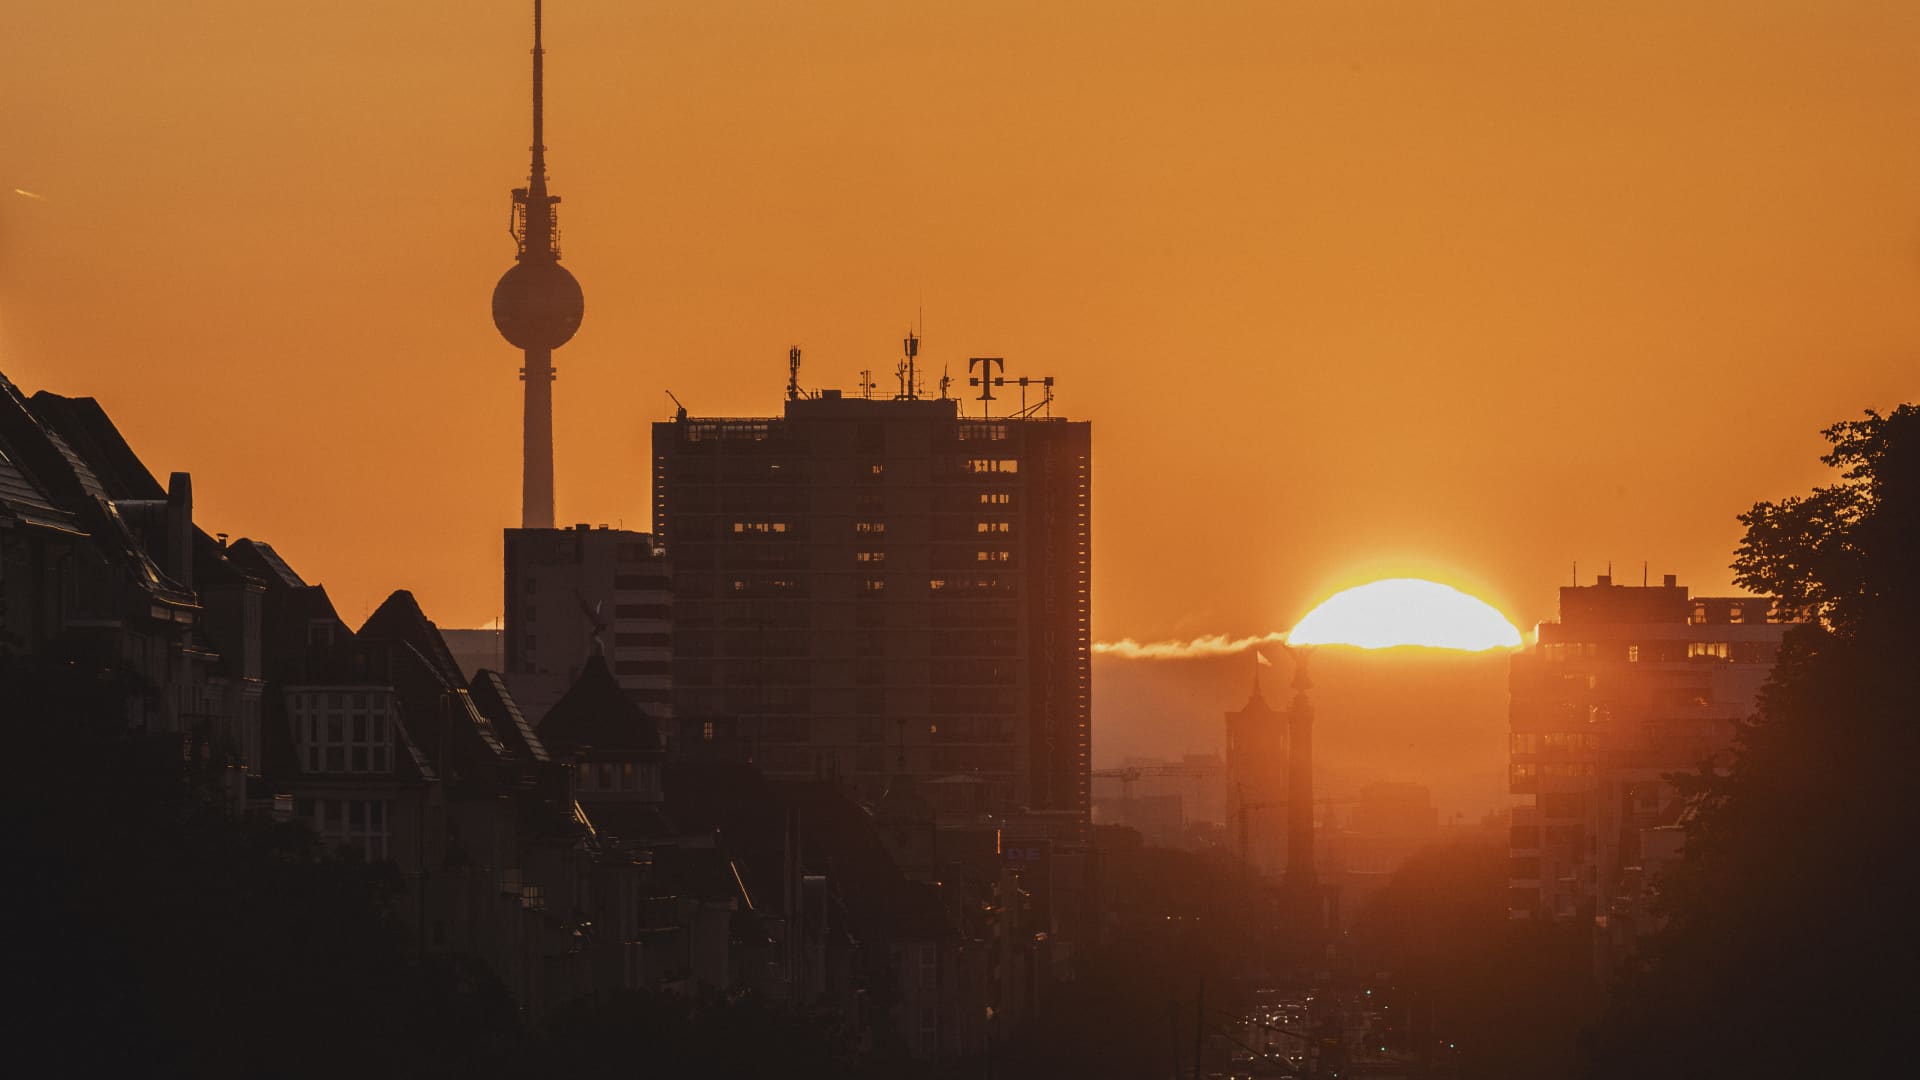 Recession-hit Germany is facing a flurry of global headwinds, Goldman Sachs says